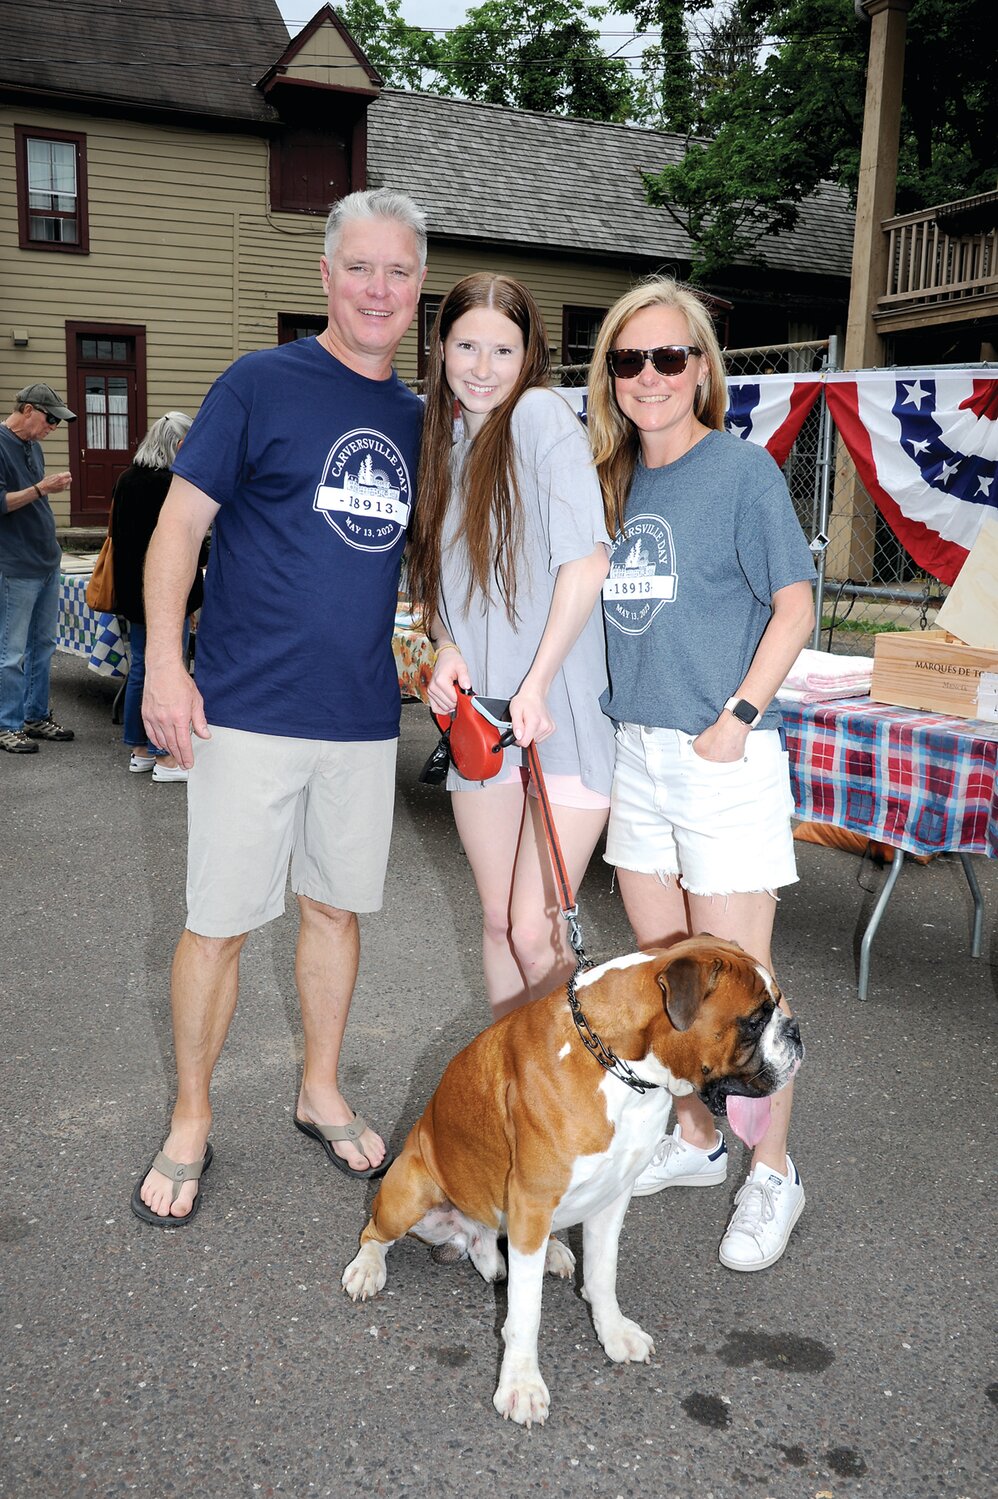 Ron, Emma and Laura Viehweger, chair of Carversville Day 2023.